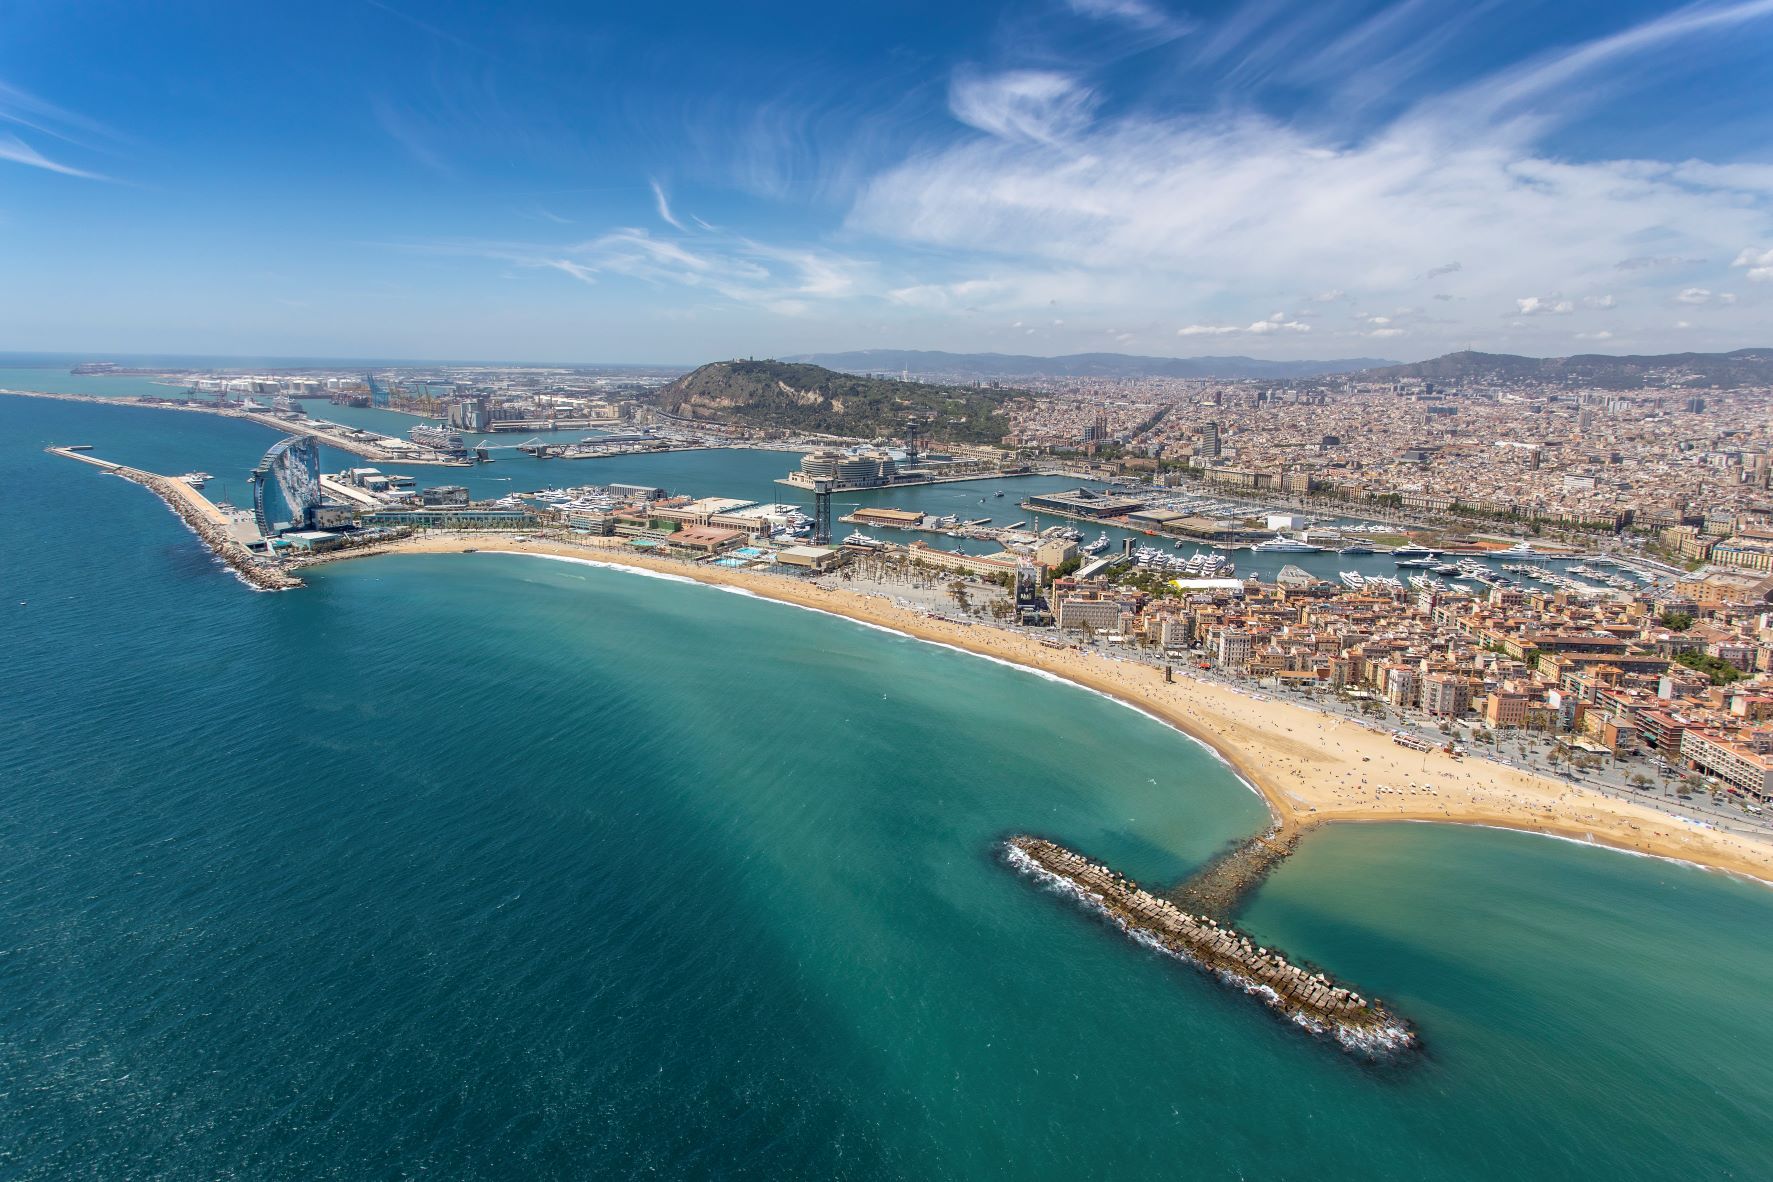 To mitigate the effects of storms, the Port of Barcelona will combine 'hard' and 'soft' measures. (Port of Barcelona)